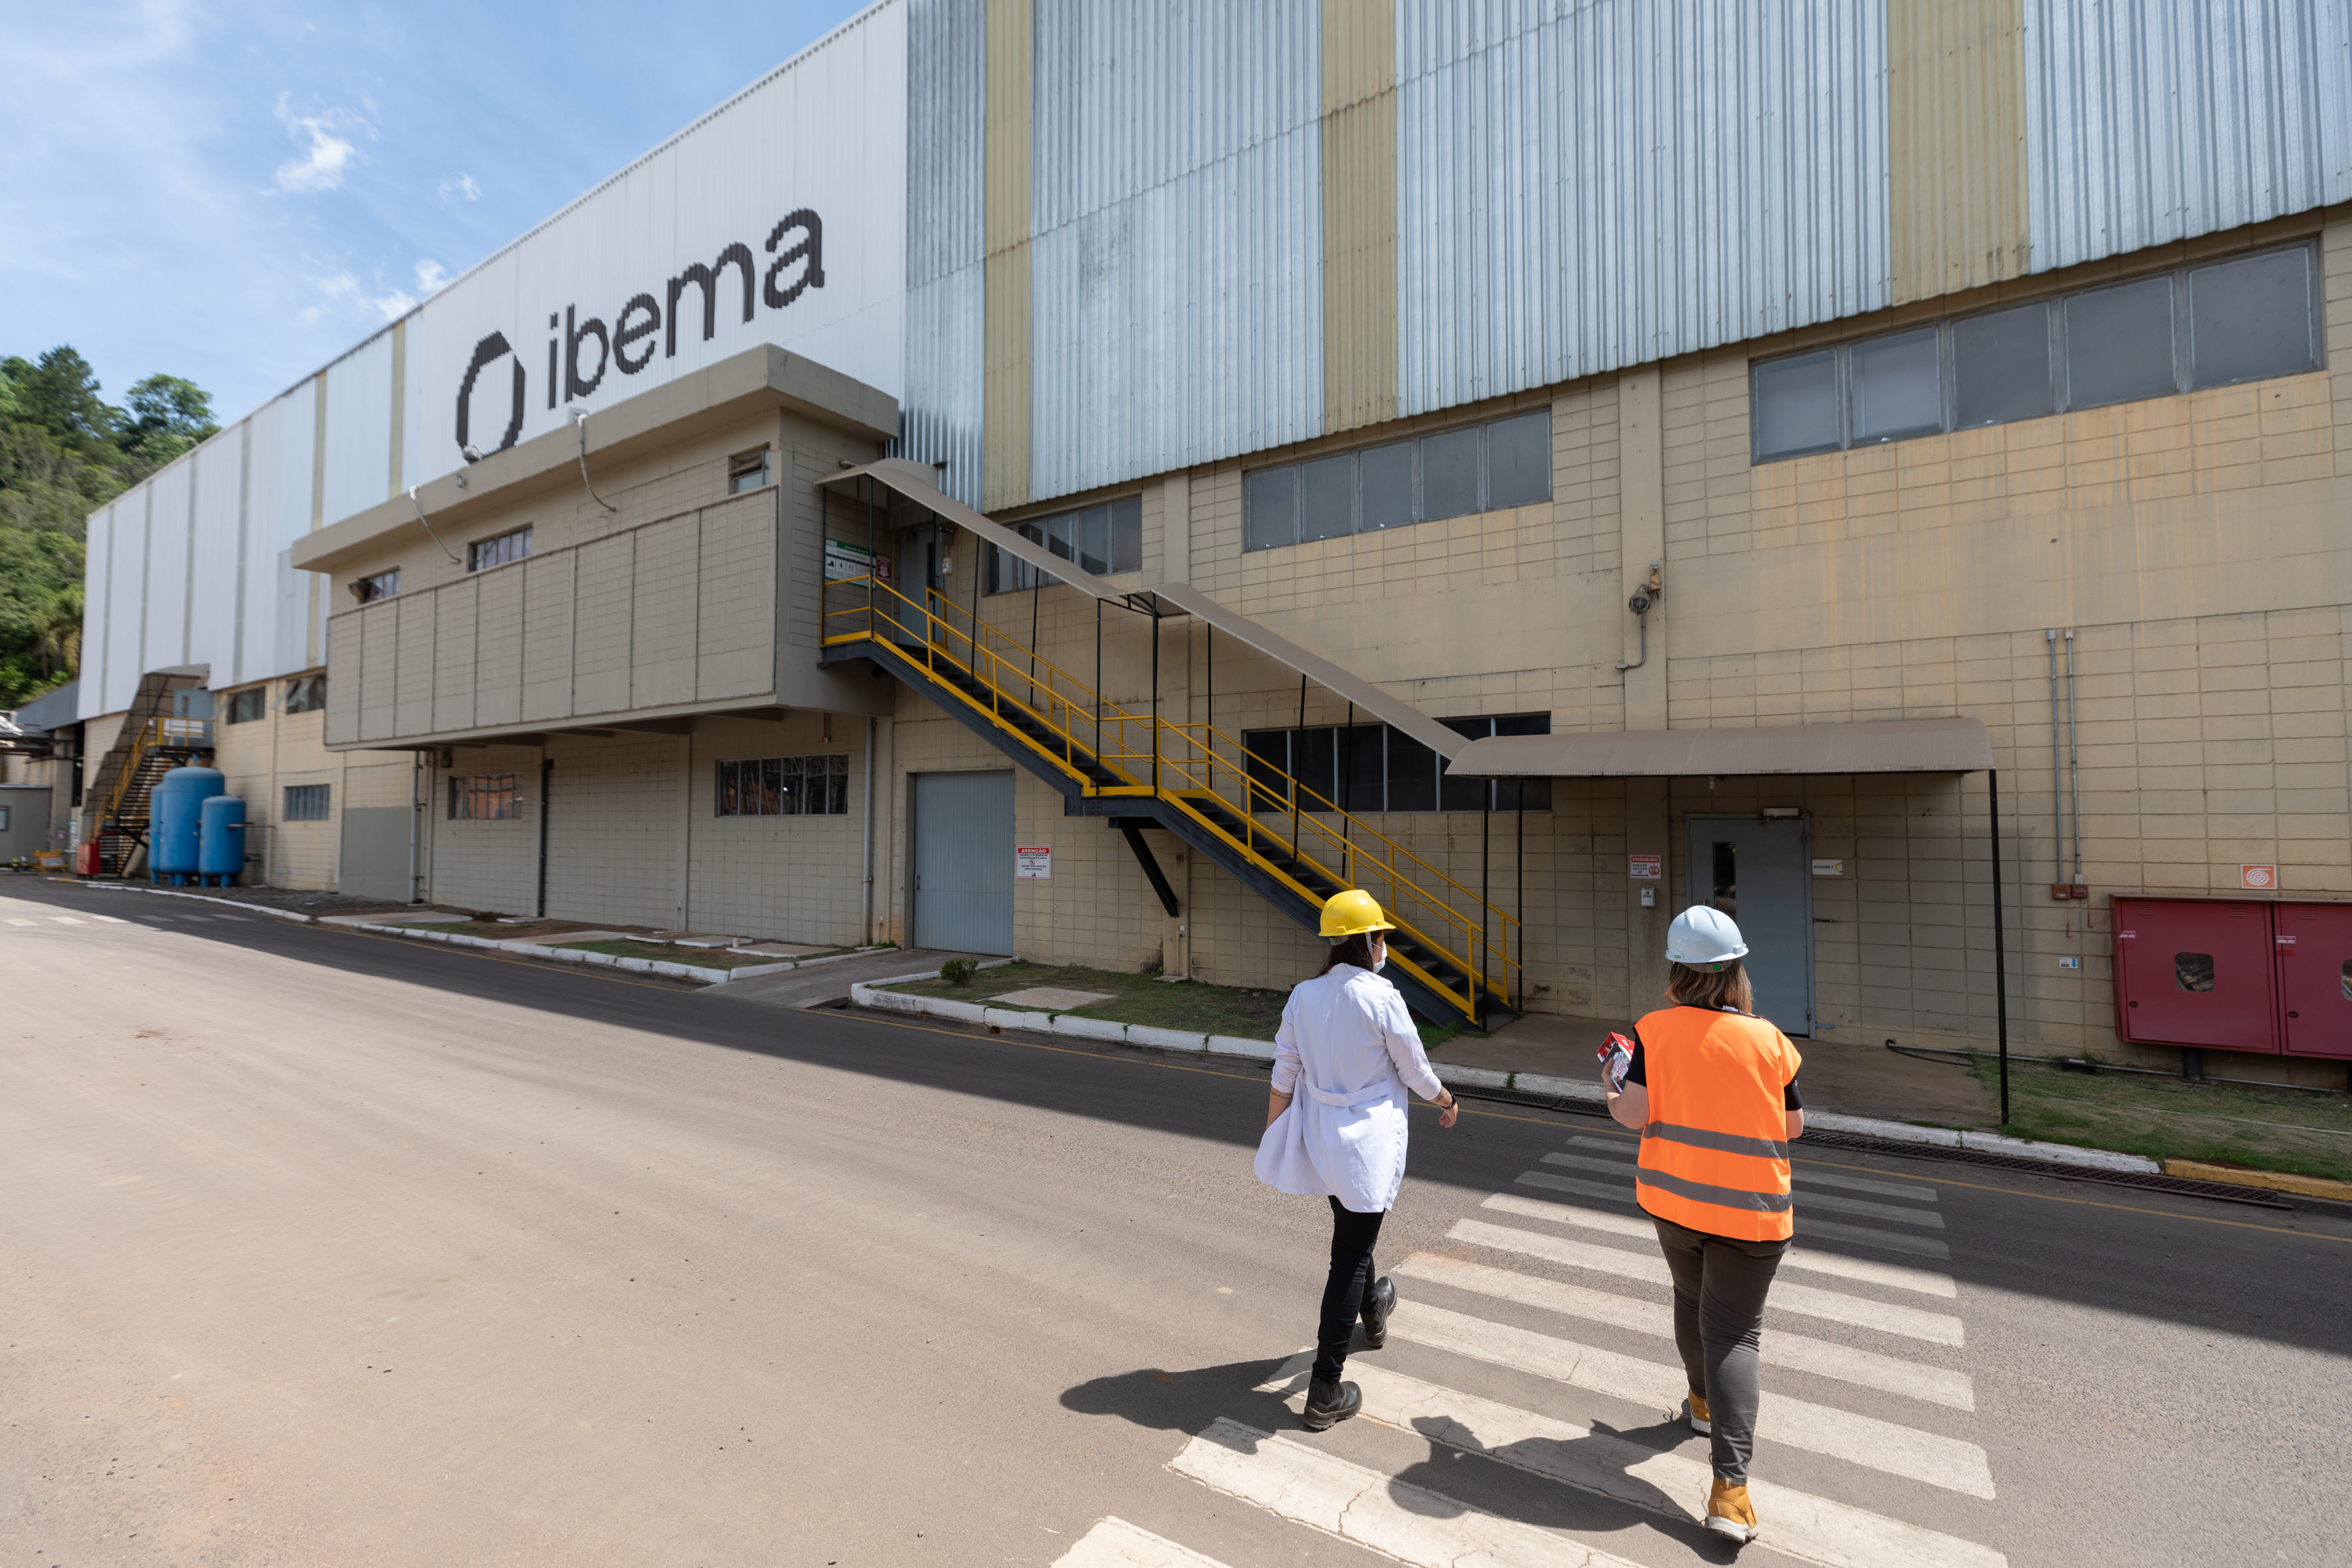 Ibema and partner dispose of 3 tons of plastic waste